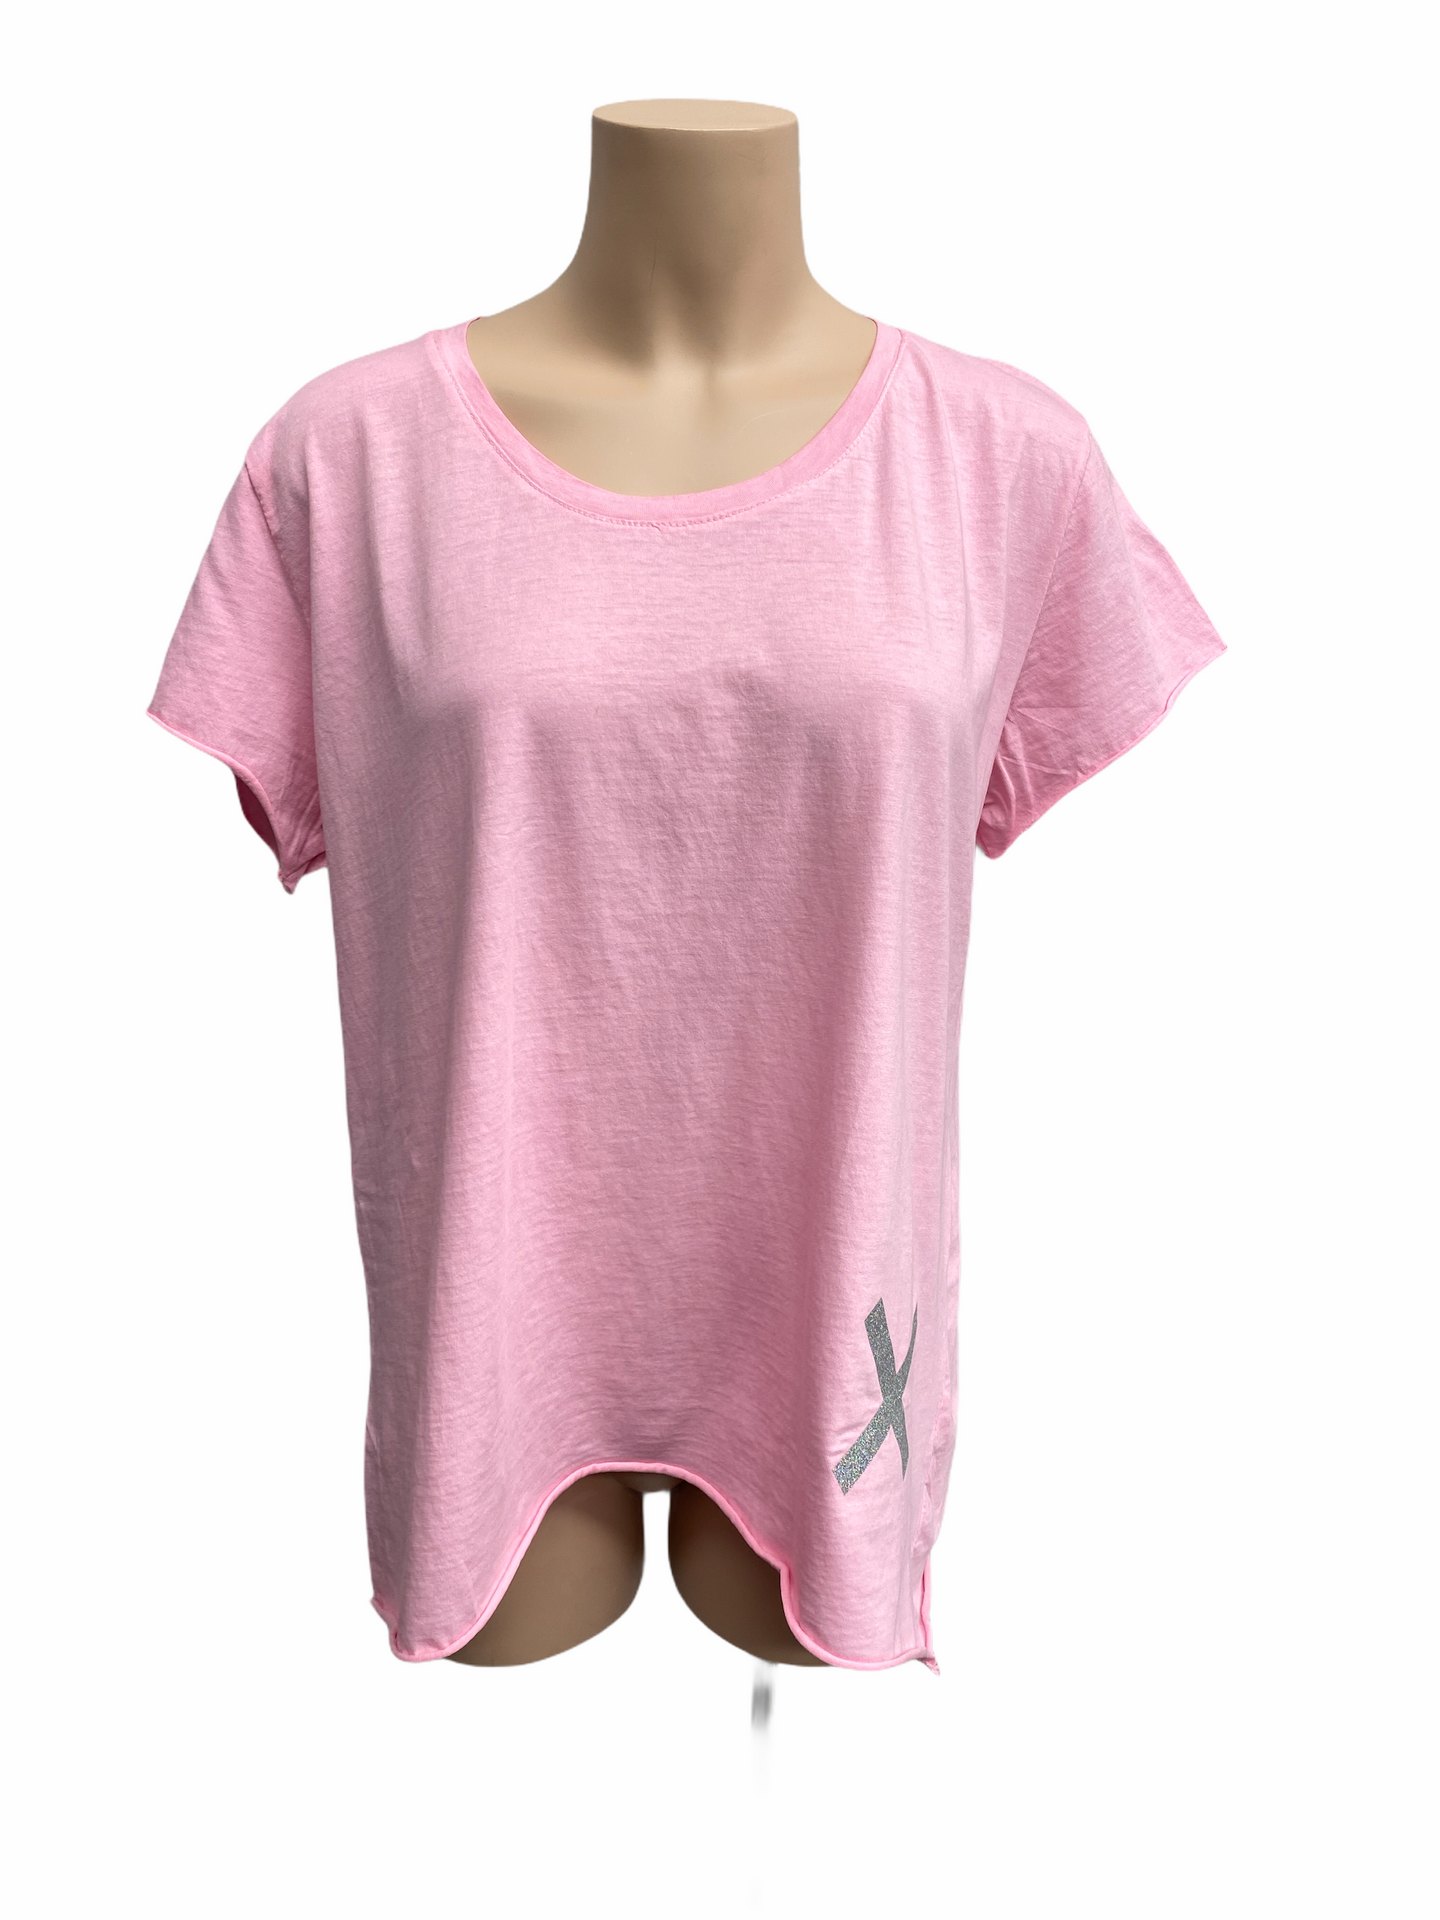 Kiss Me Cotton Hi Lo Tee - Rose - Amici Made in Italy